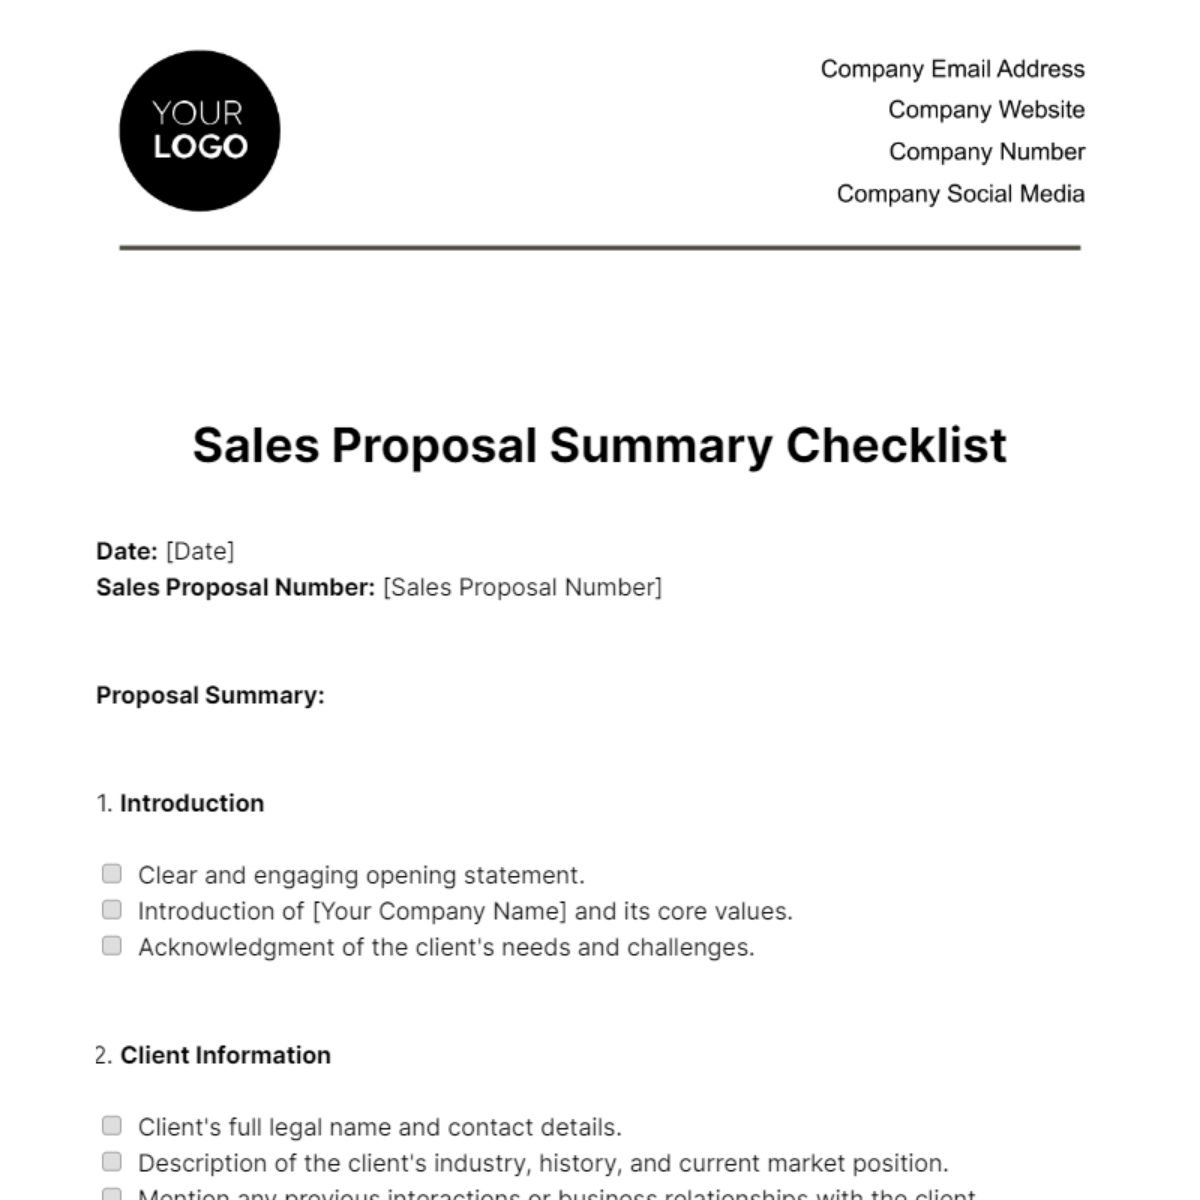 Free Sales Proposal Summary Checklist Template